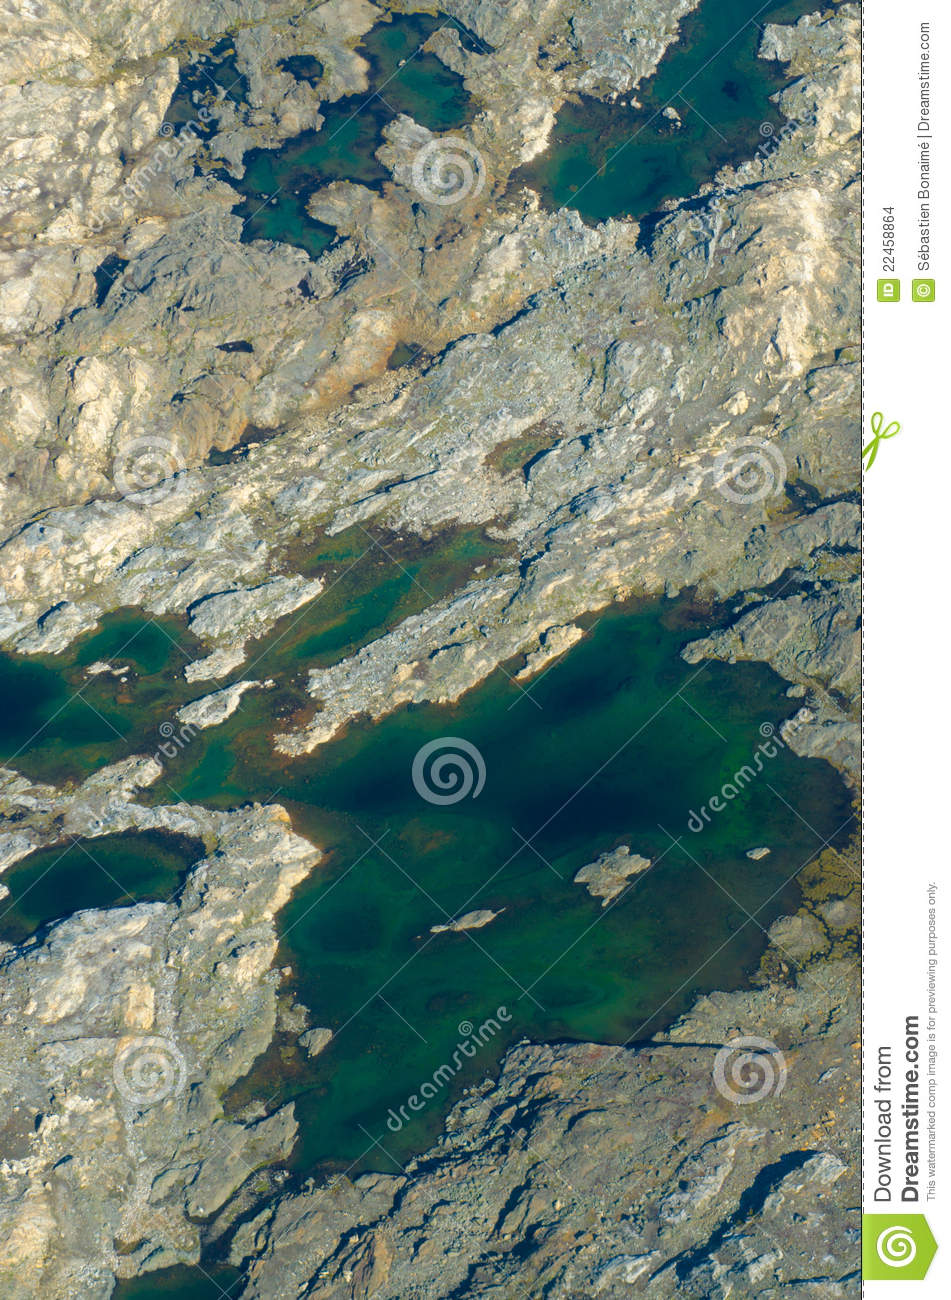 Green Glacier Lakes In Greenland Stock Images   Image  22458864